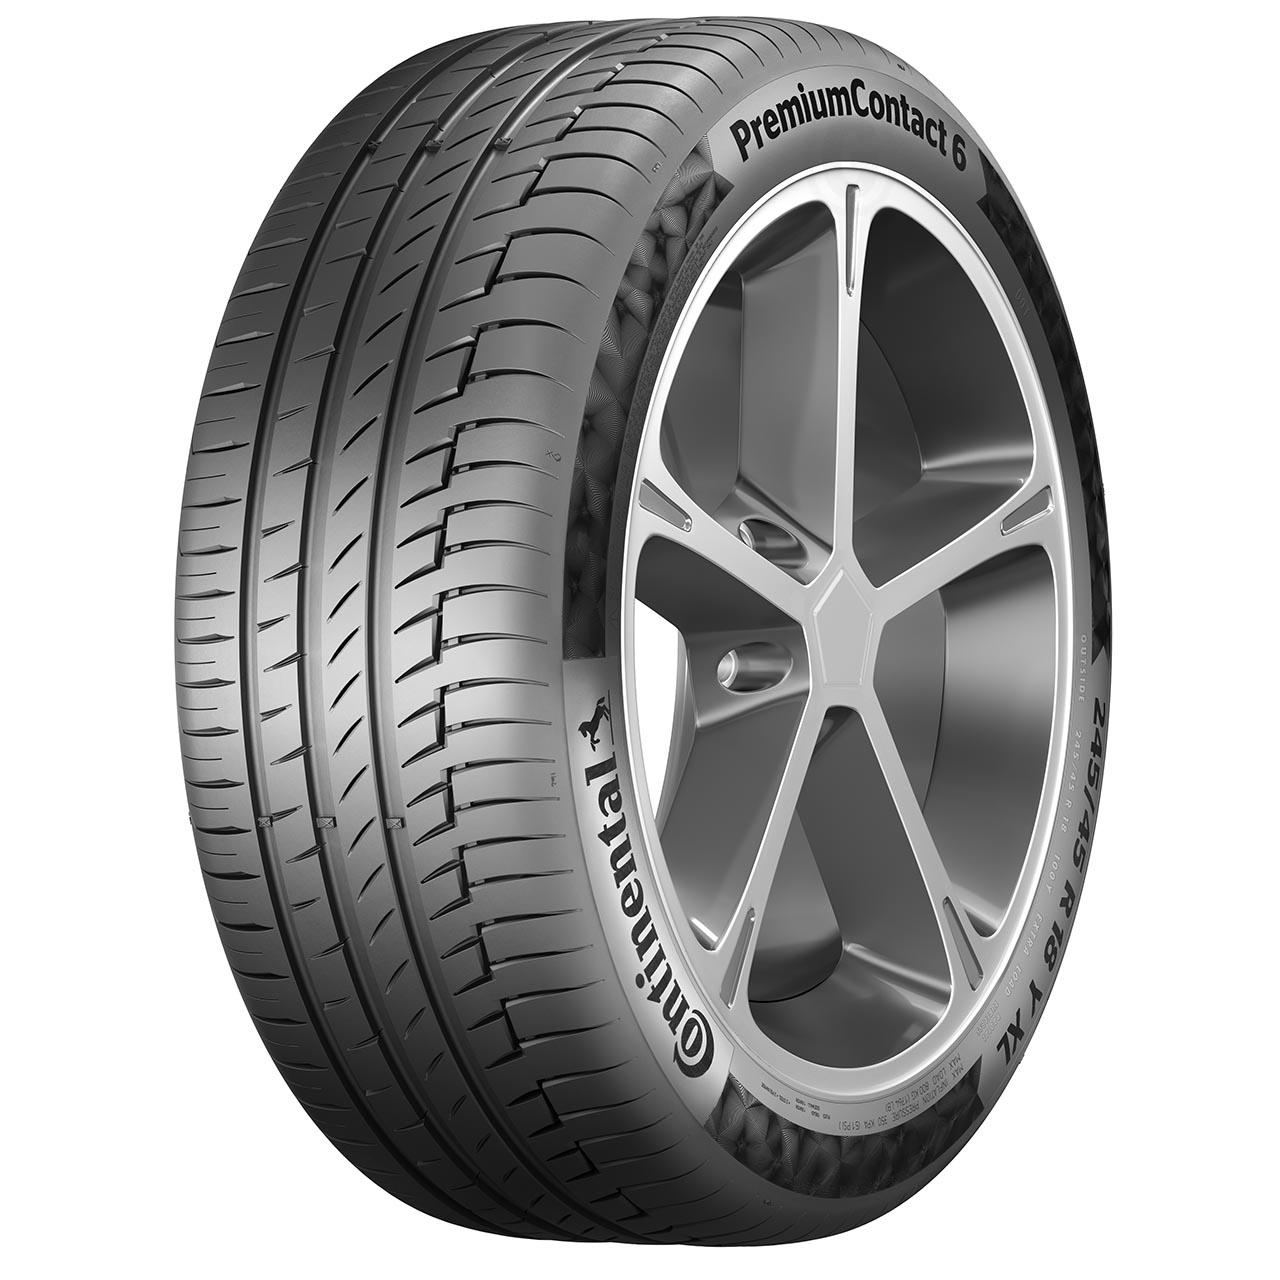 Continental PREMIUMCONTACT 6 235/40R19 96W XL FOR